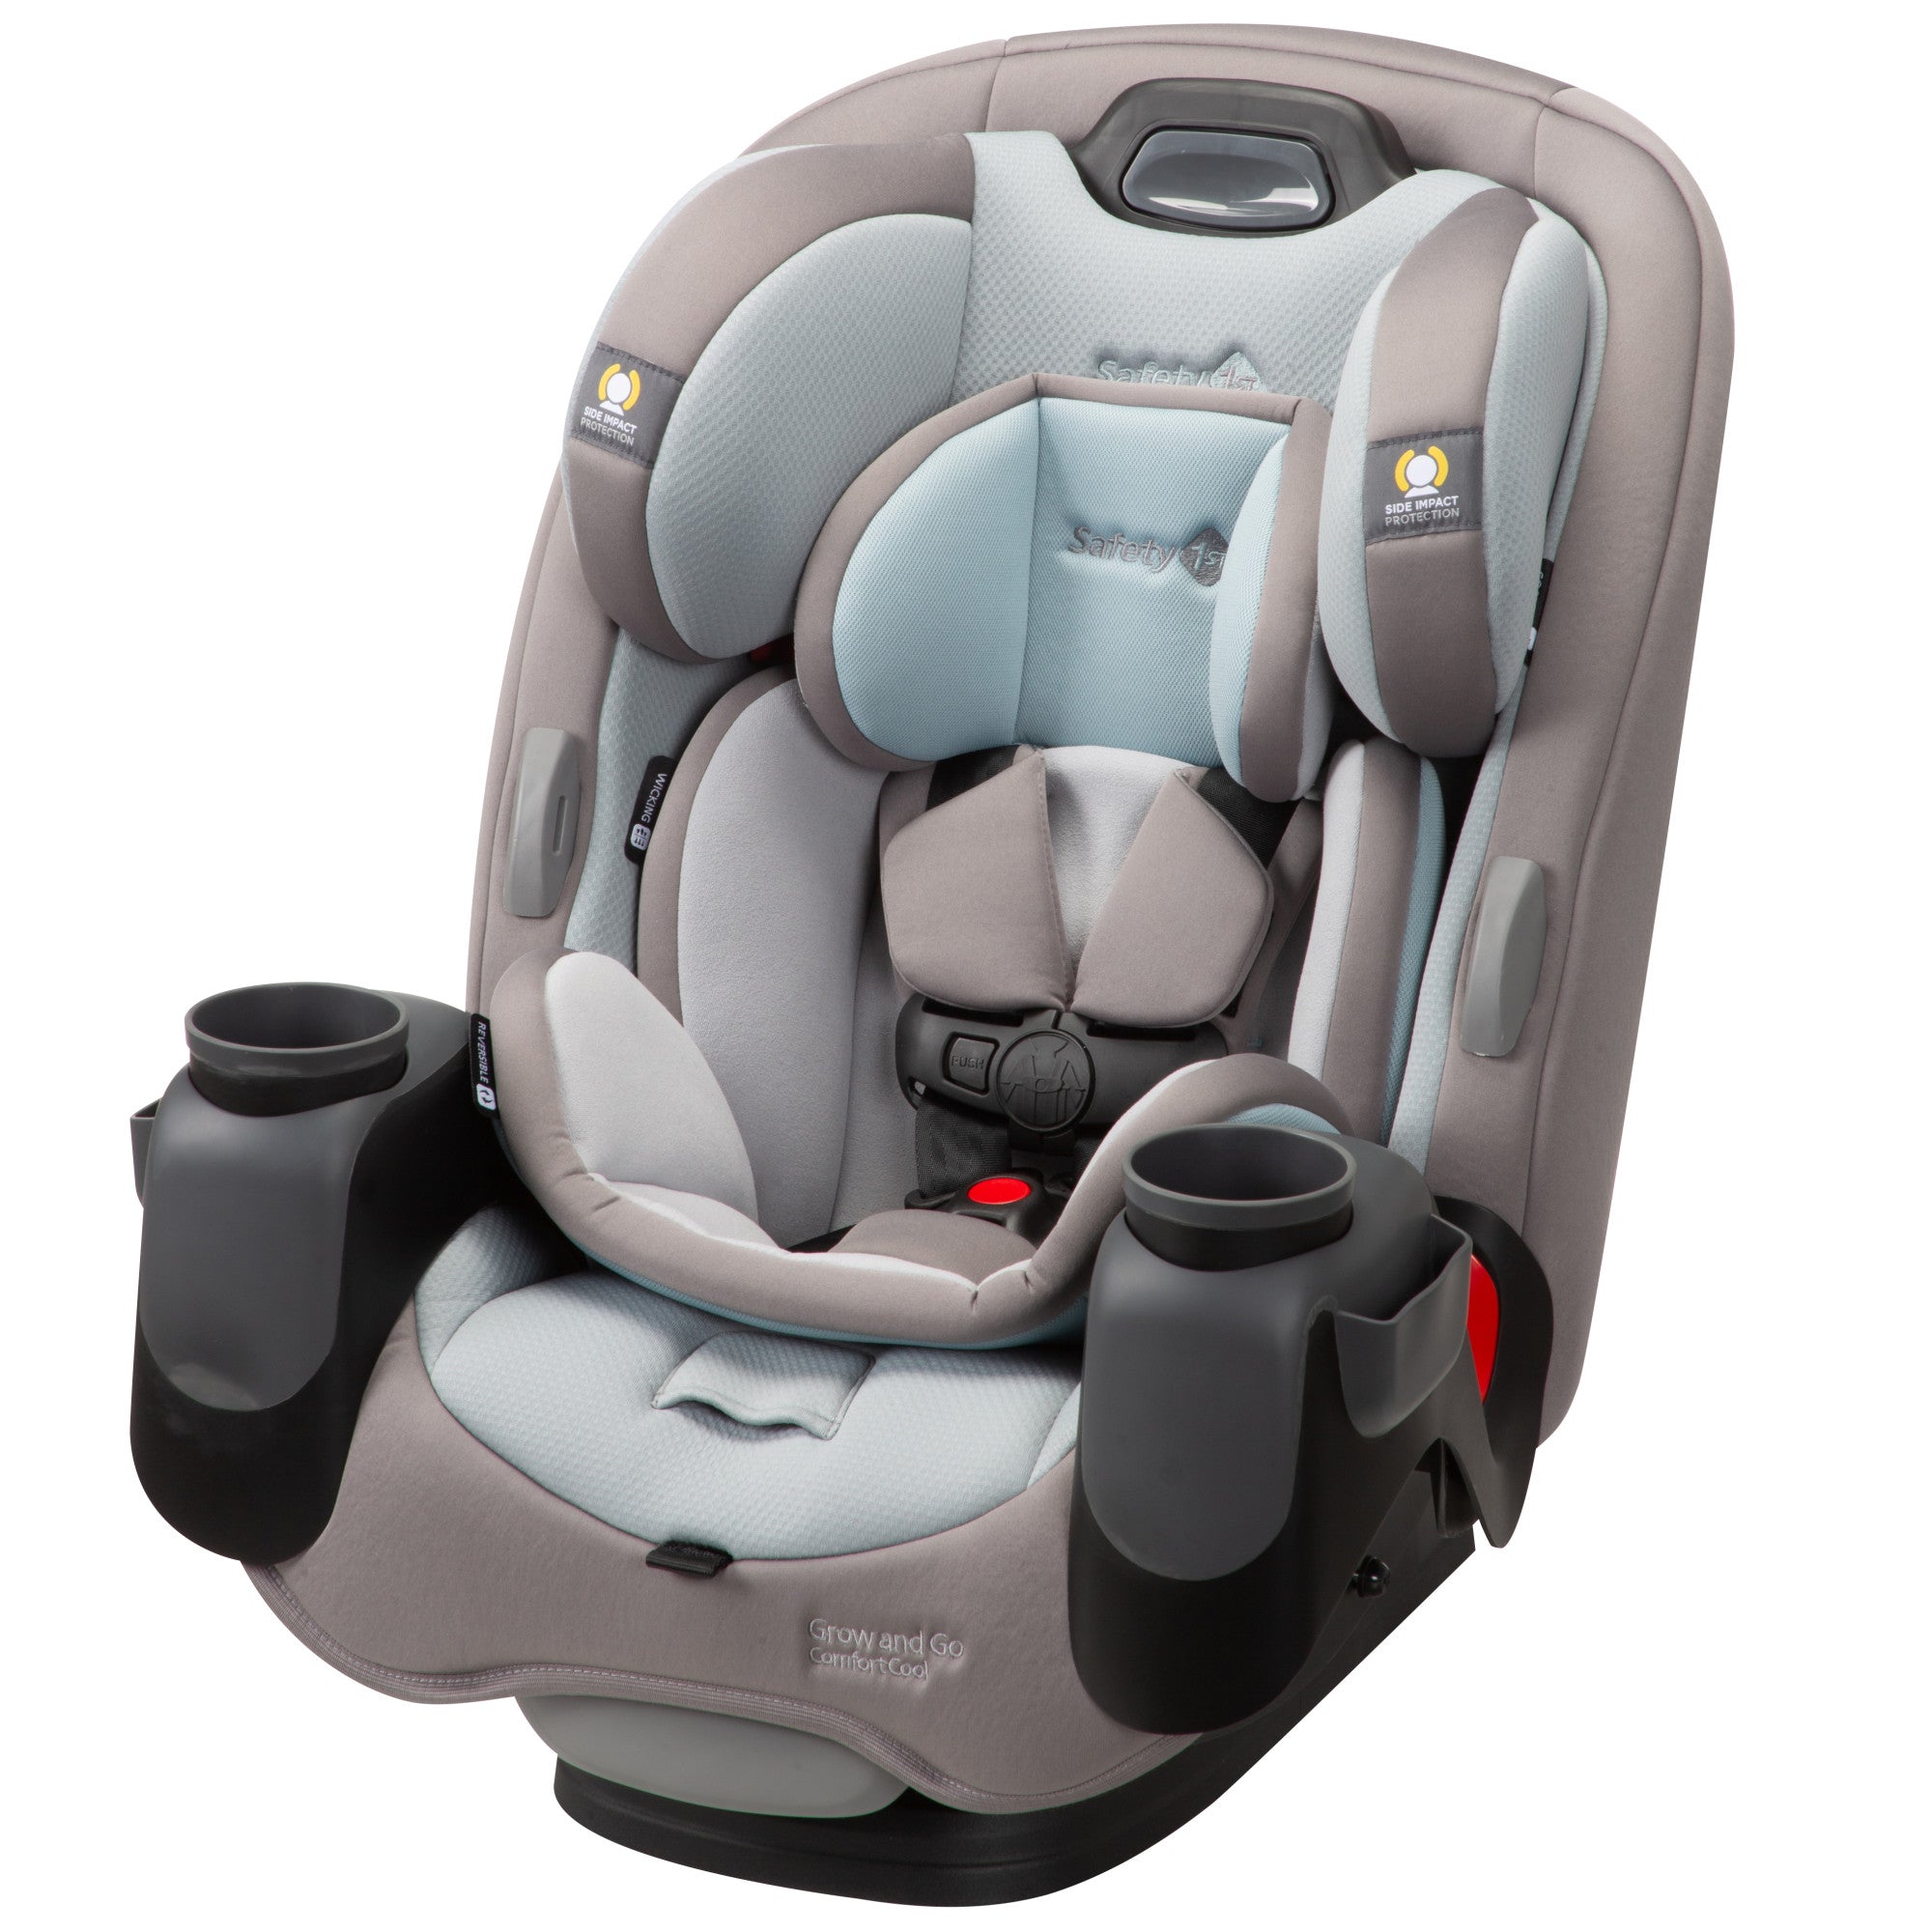 Grow and Go™ Comfort Cool All-in-One Convertible Car Seat - Niagara Mist